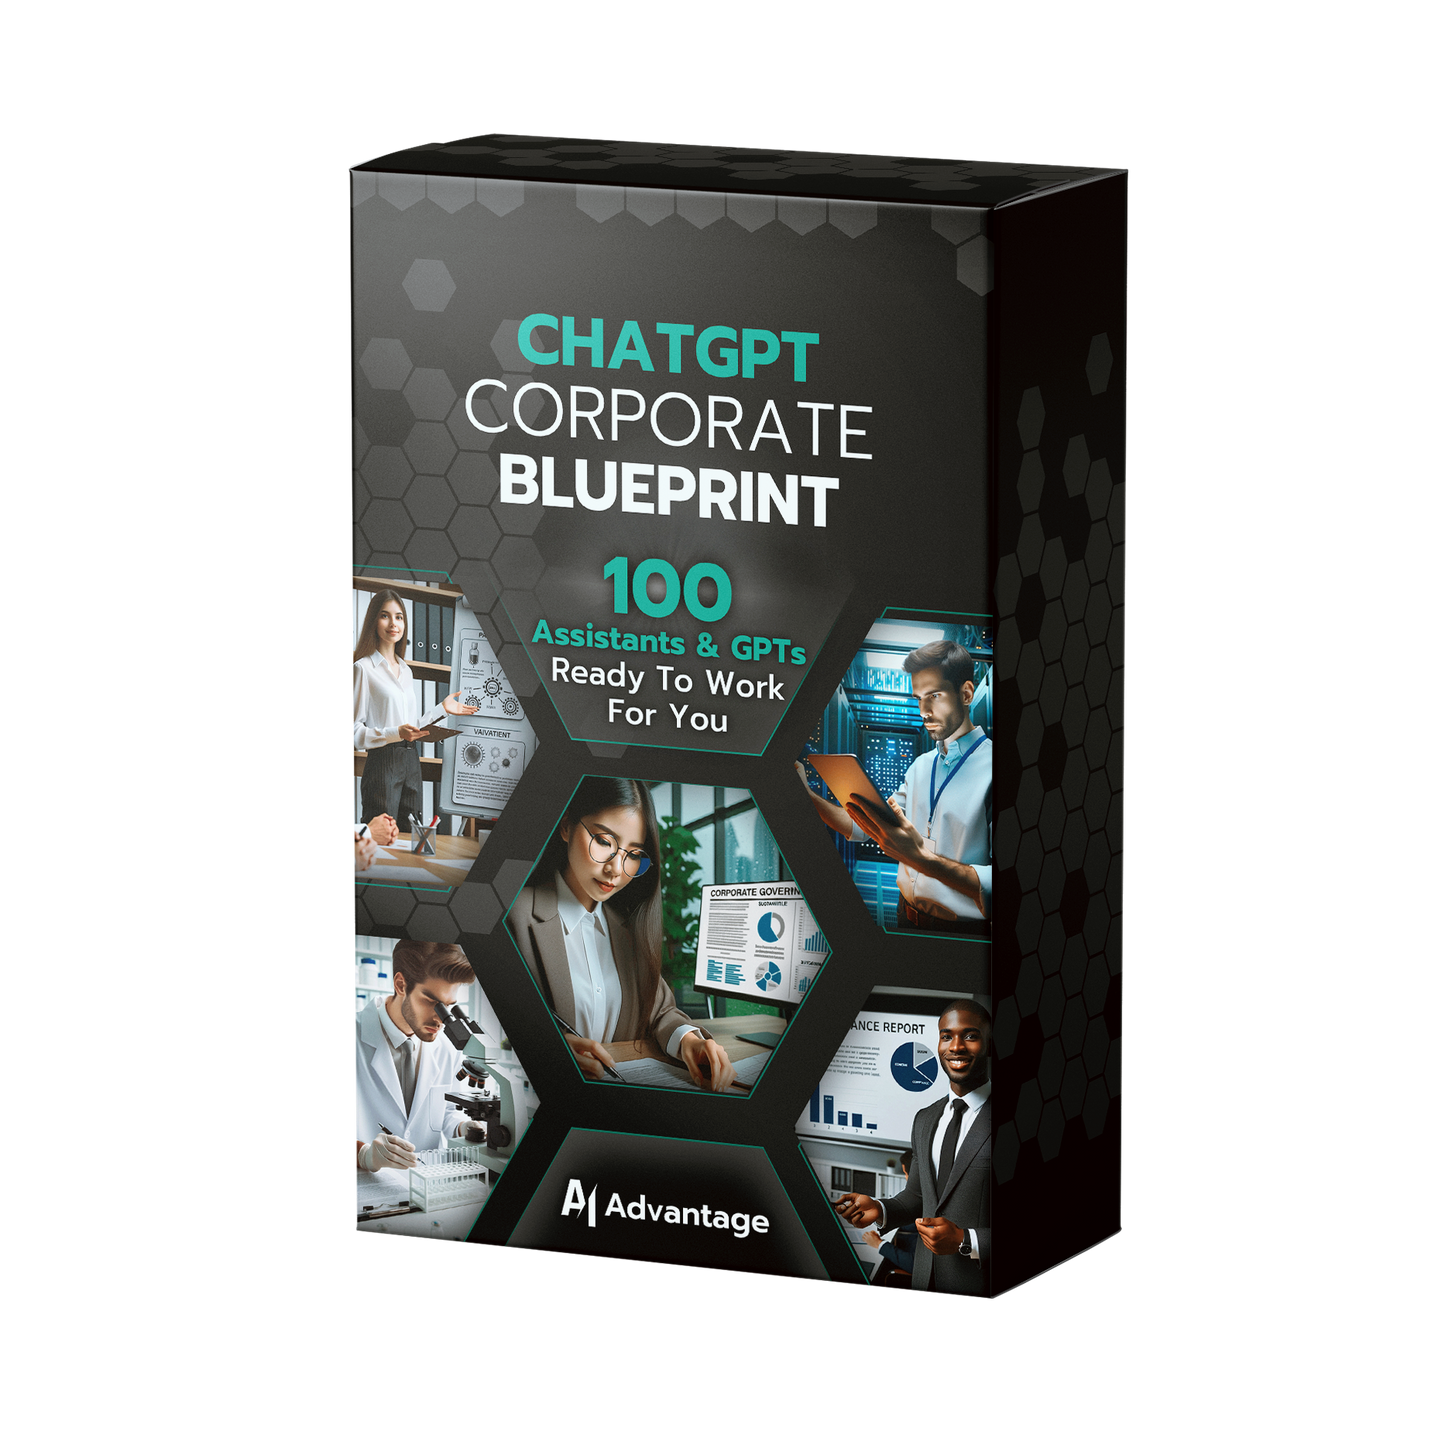 ChatGPT Corporate Blueprint - 100 Corporate Workers